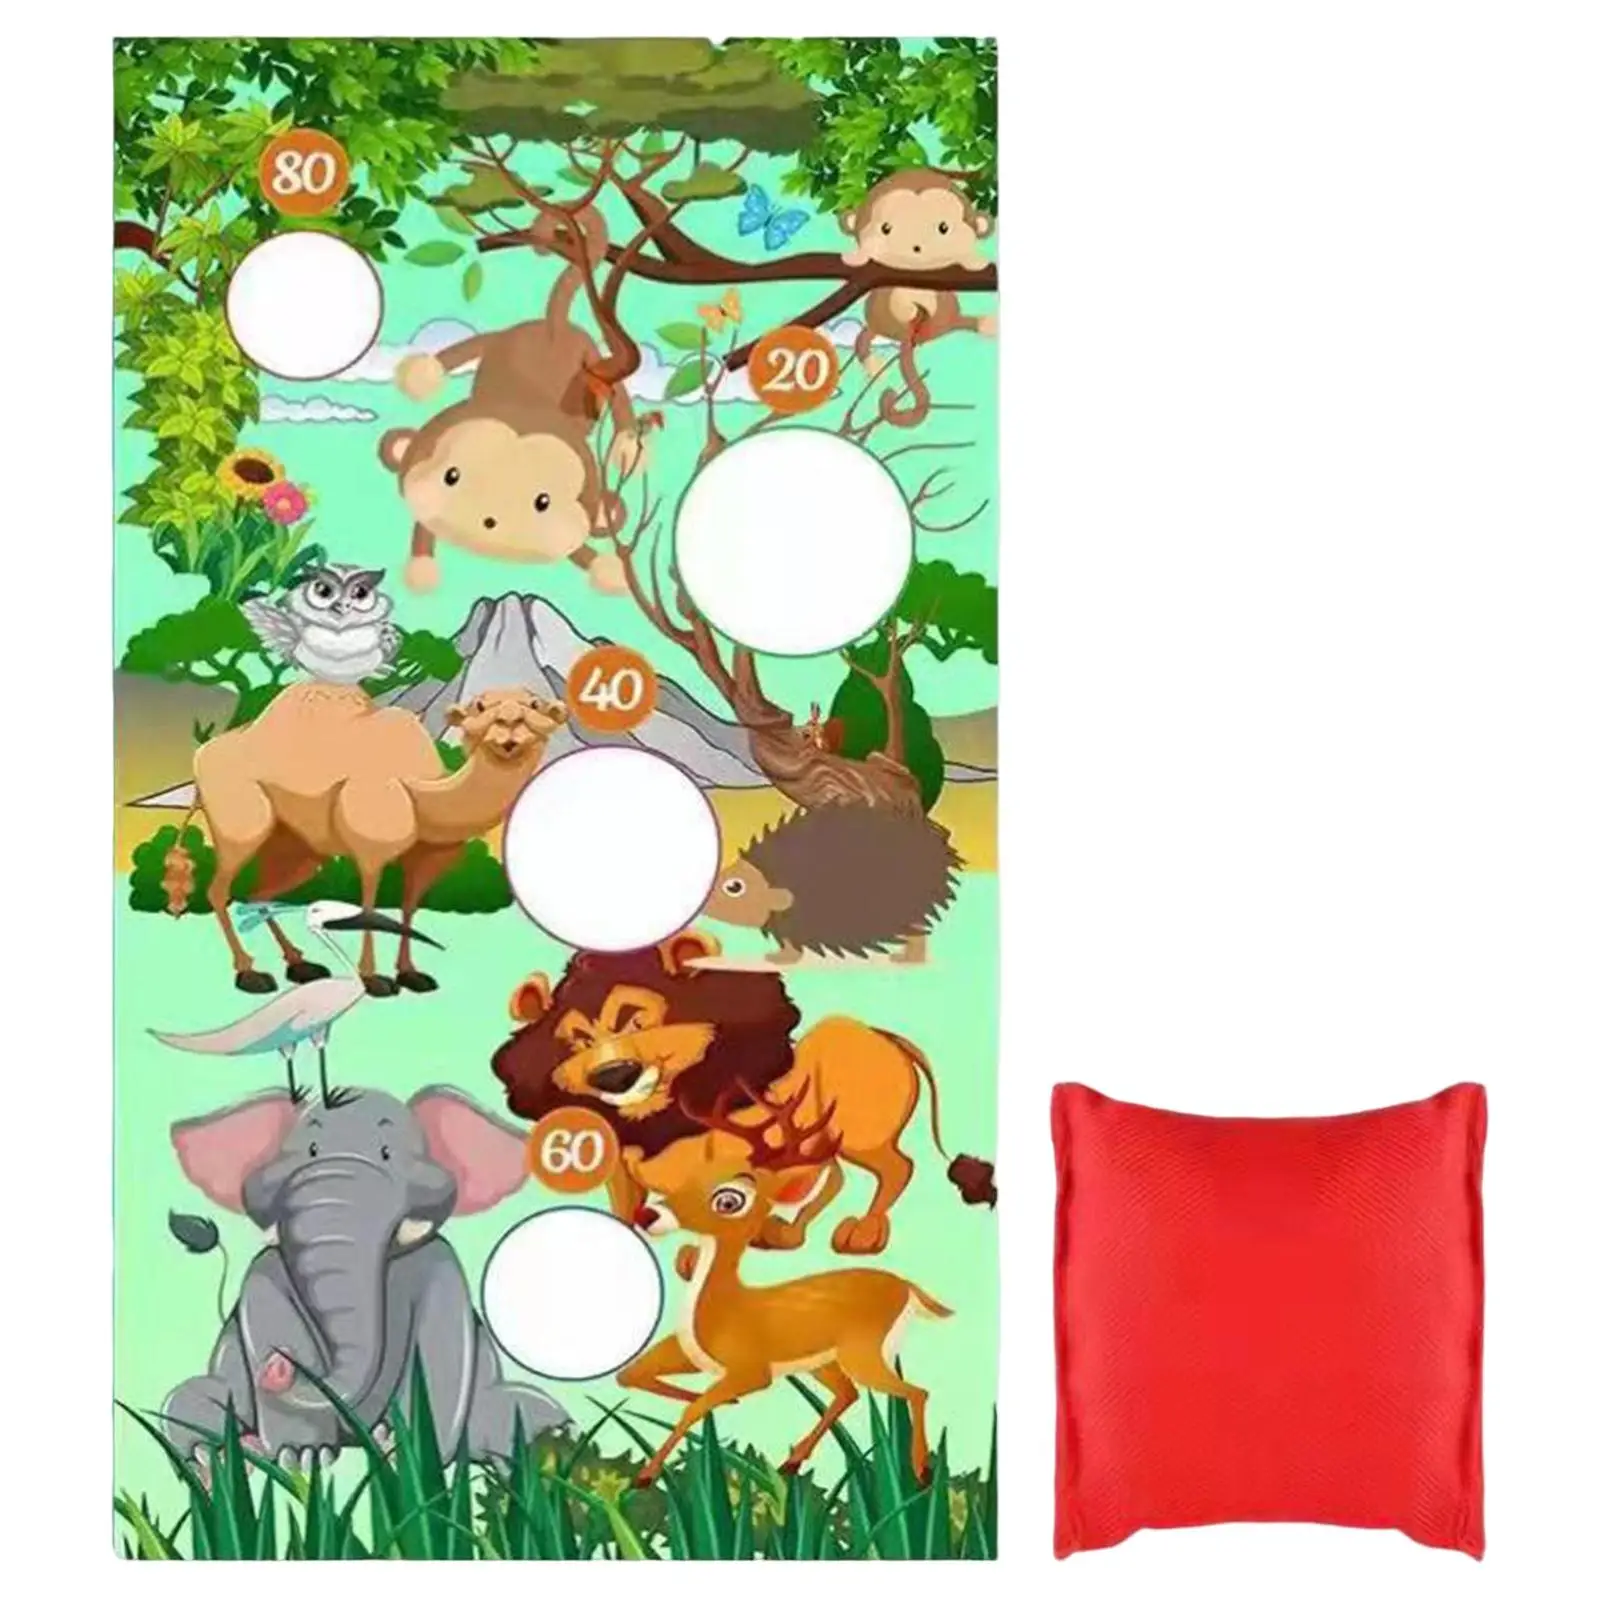 Animal Background Toss Game Decor Fun Bean Bags Game Kit Hanging for Outdoor Gifts Birthday Kids Parent-Child